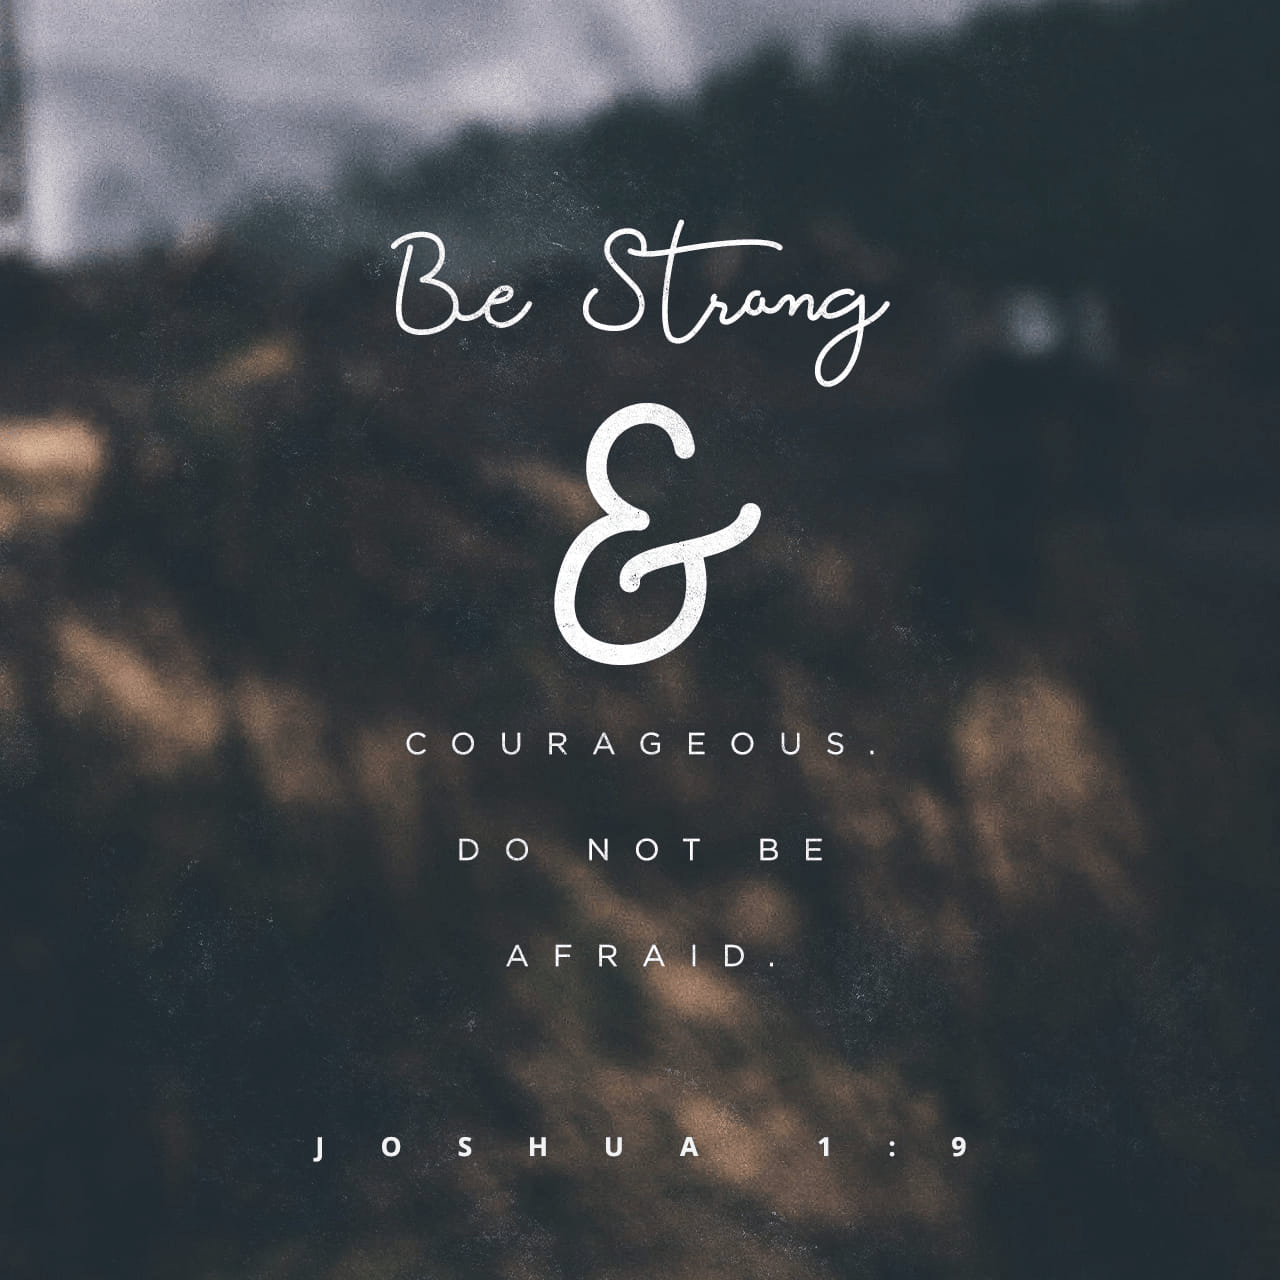 VOTD March 28 - “Have I not commanded you? Be strong and courageous! Do not tremble or be dismayed, for the LORD your God is with you wherever you go.”” ‭‭Joshua‬ ‭1:9‬ ‭NASB‬‬